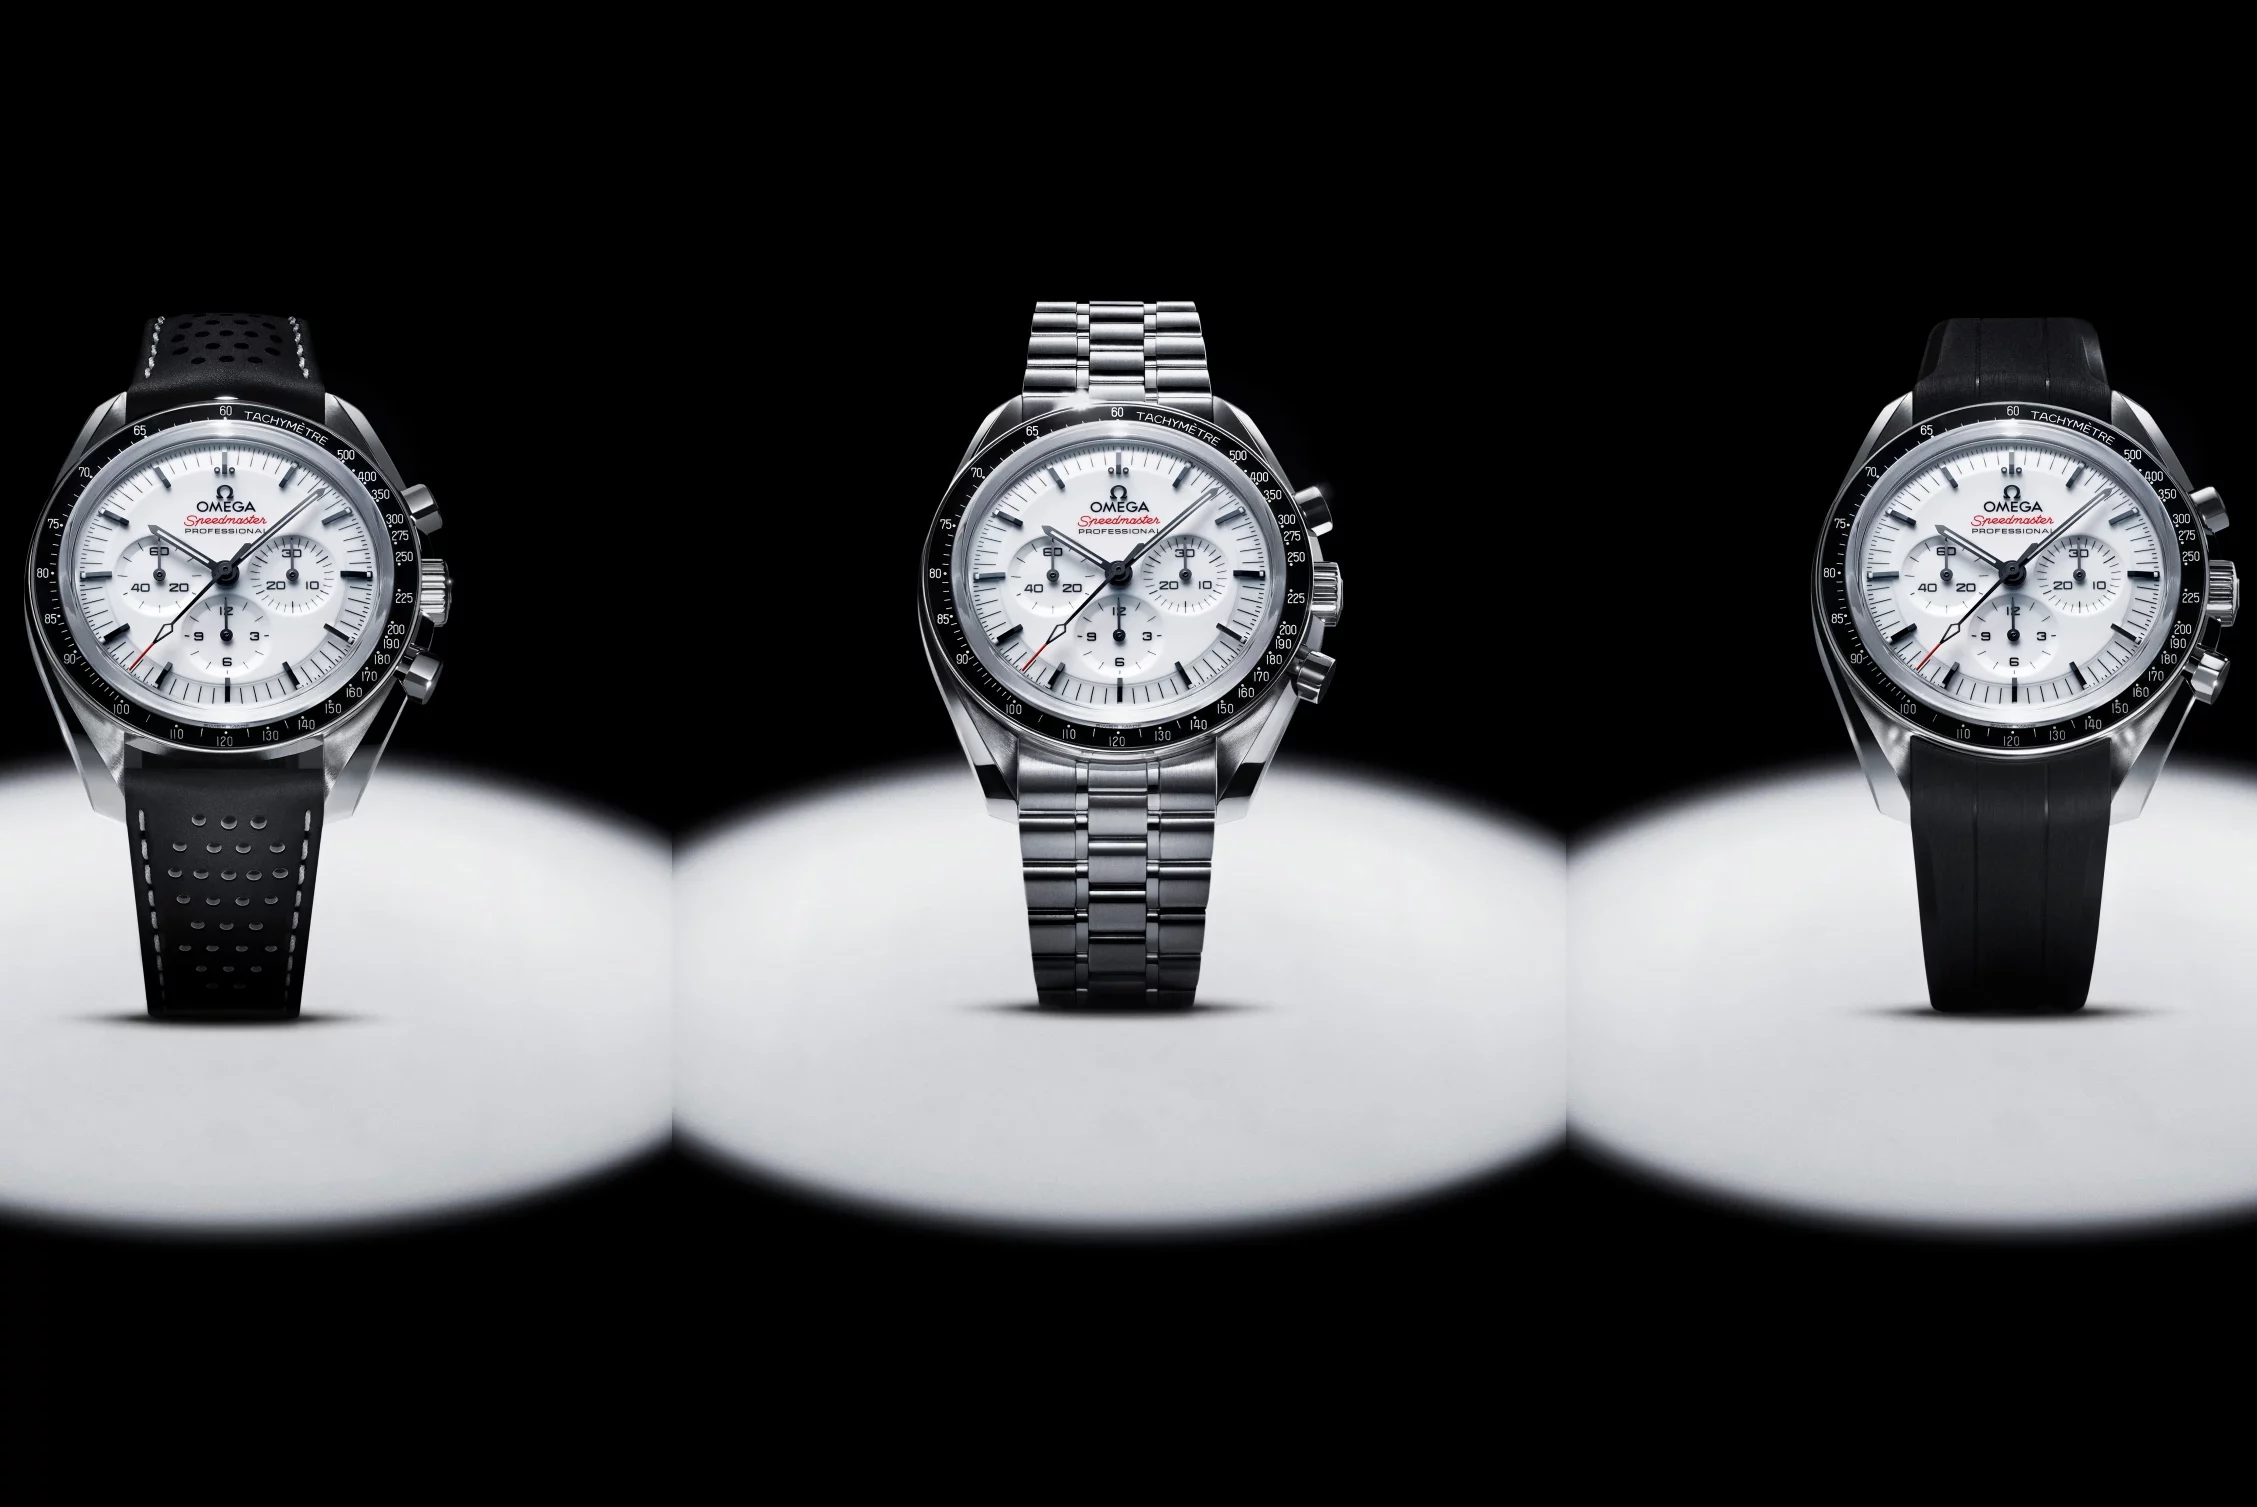 Omega adds a white dial to the Speedmaster